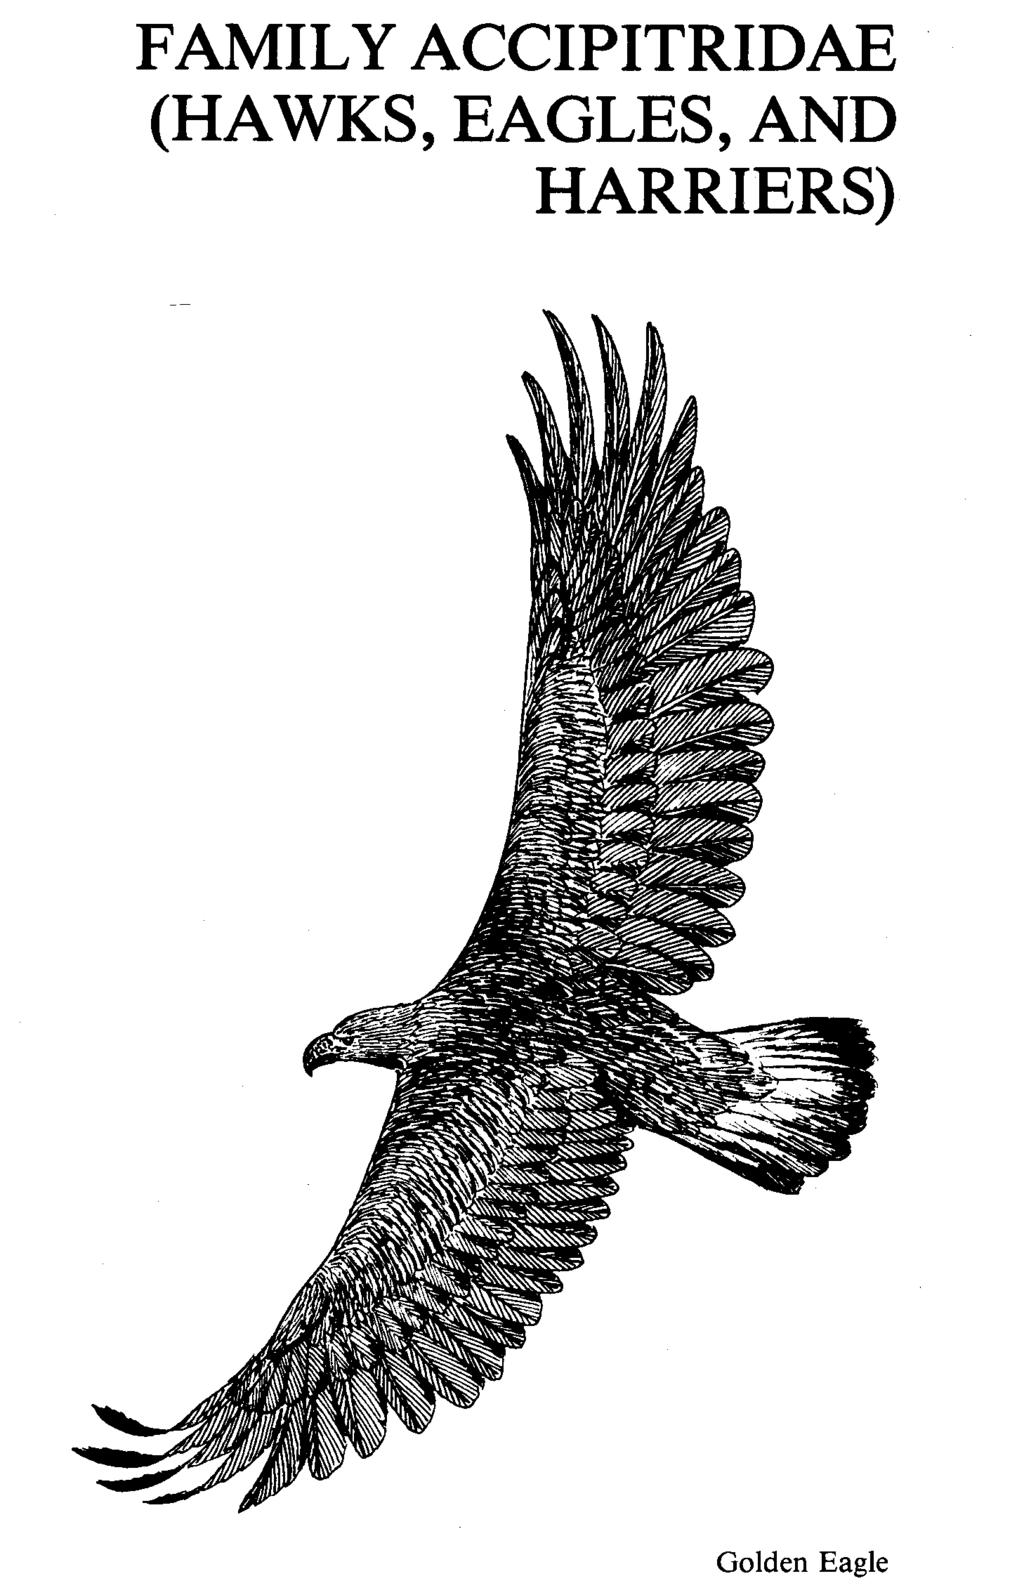 FAMILY ACCIPITRIDAE (HAWKS, EAGLES, AND HARRIERS) Golden Eagle Published in Birds of the Great Plains: Breeding Species and